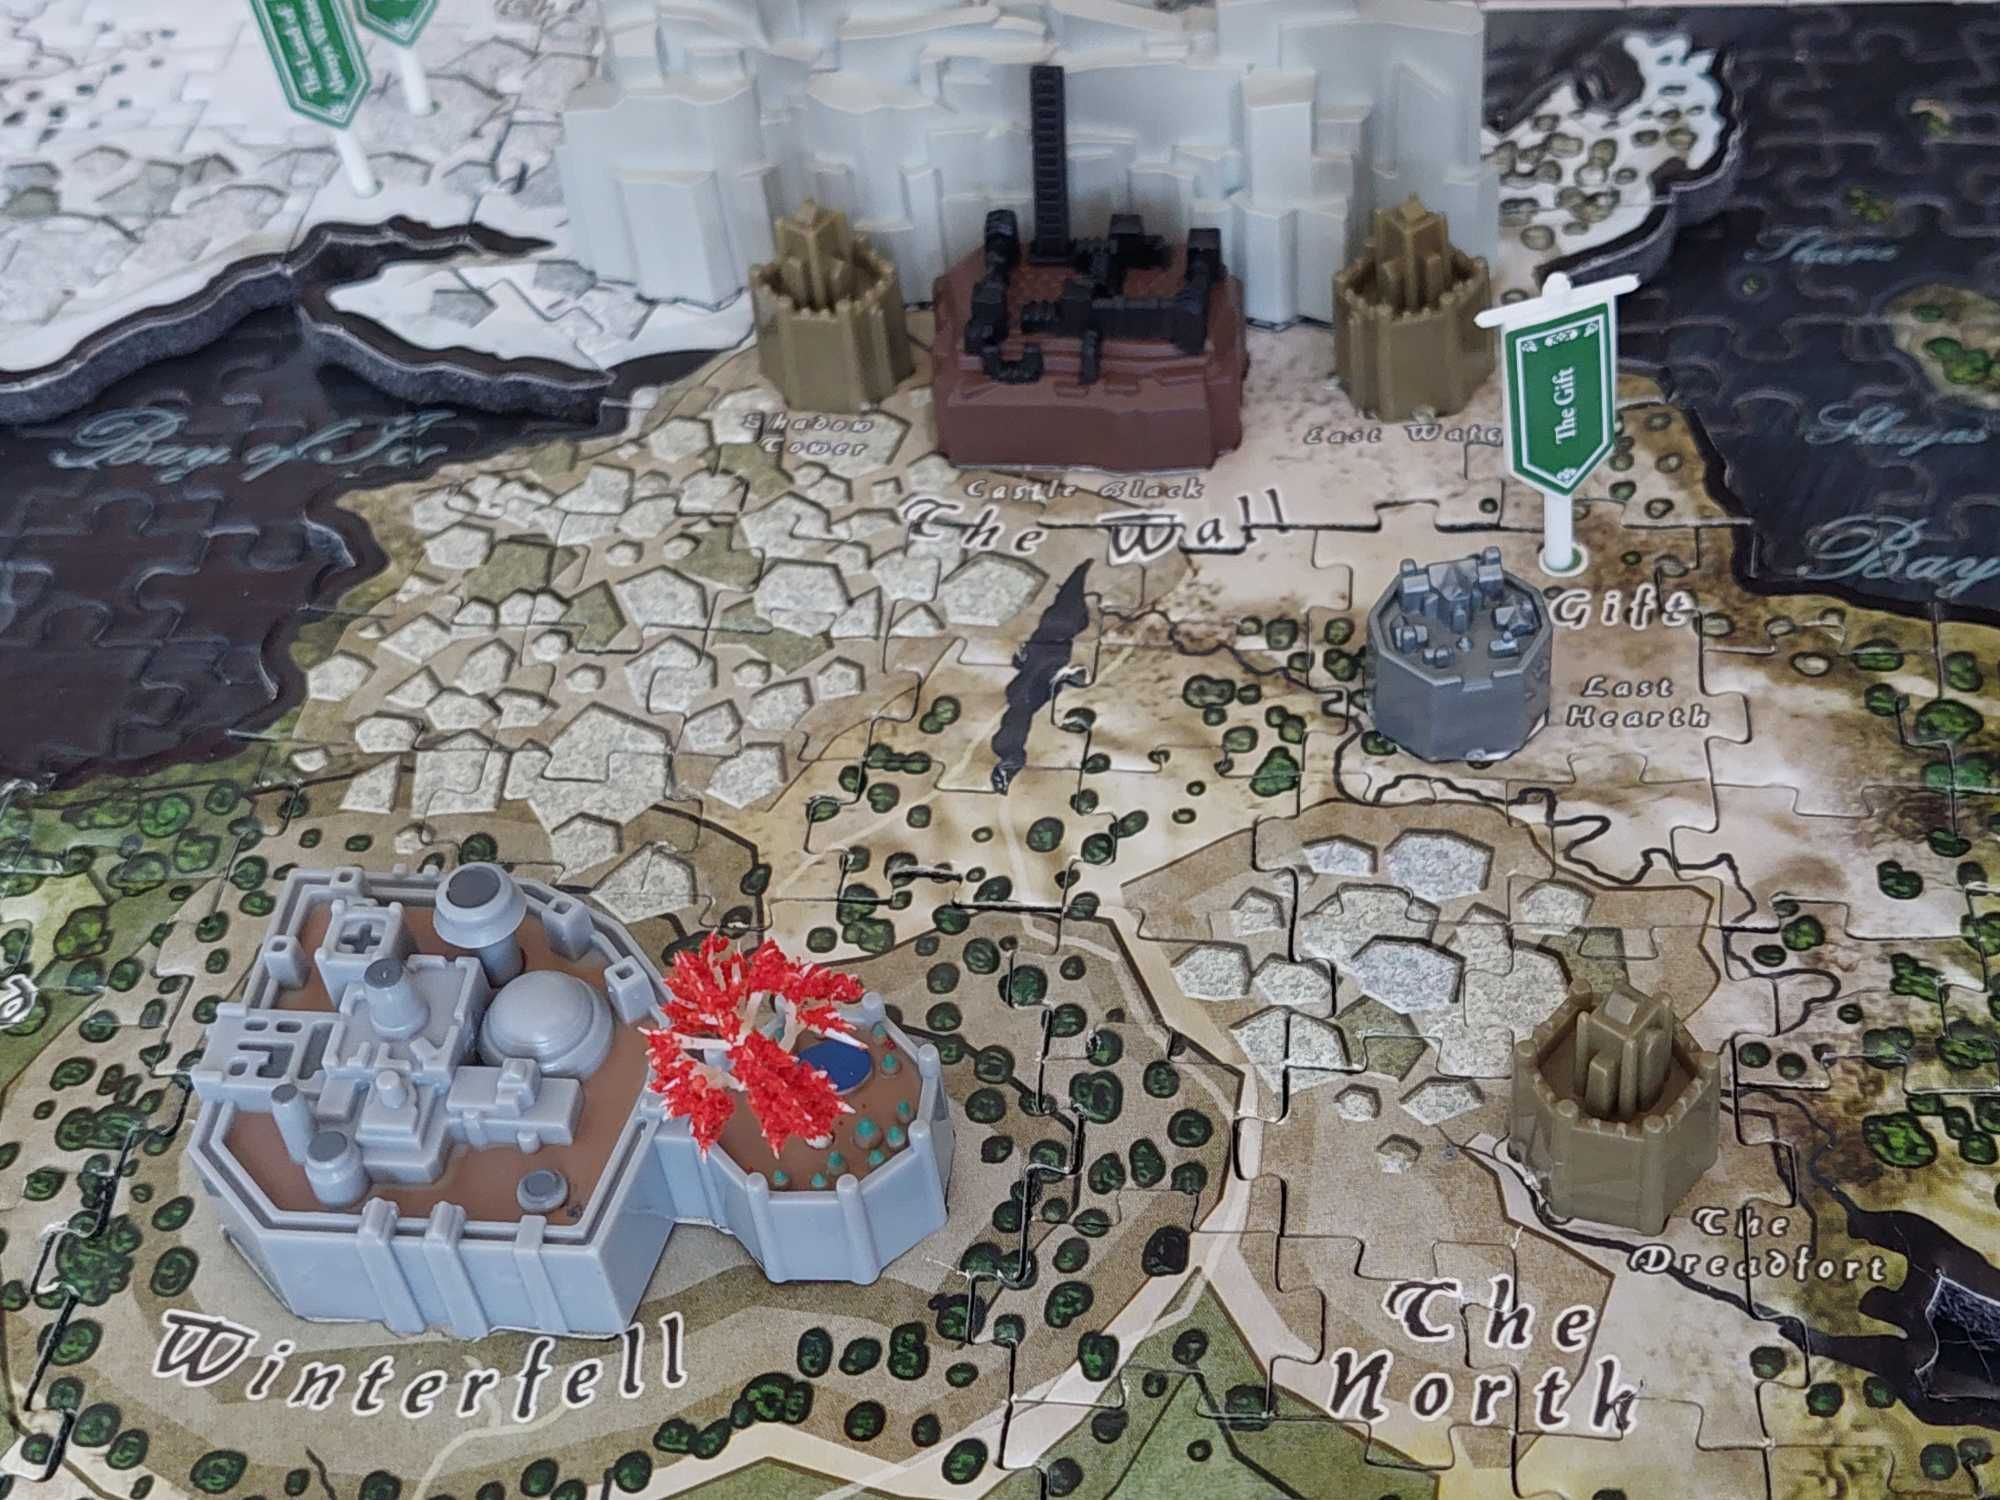 4D Cityscape: Game of Thrones HBO Puzzle of Westeros gra o tron